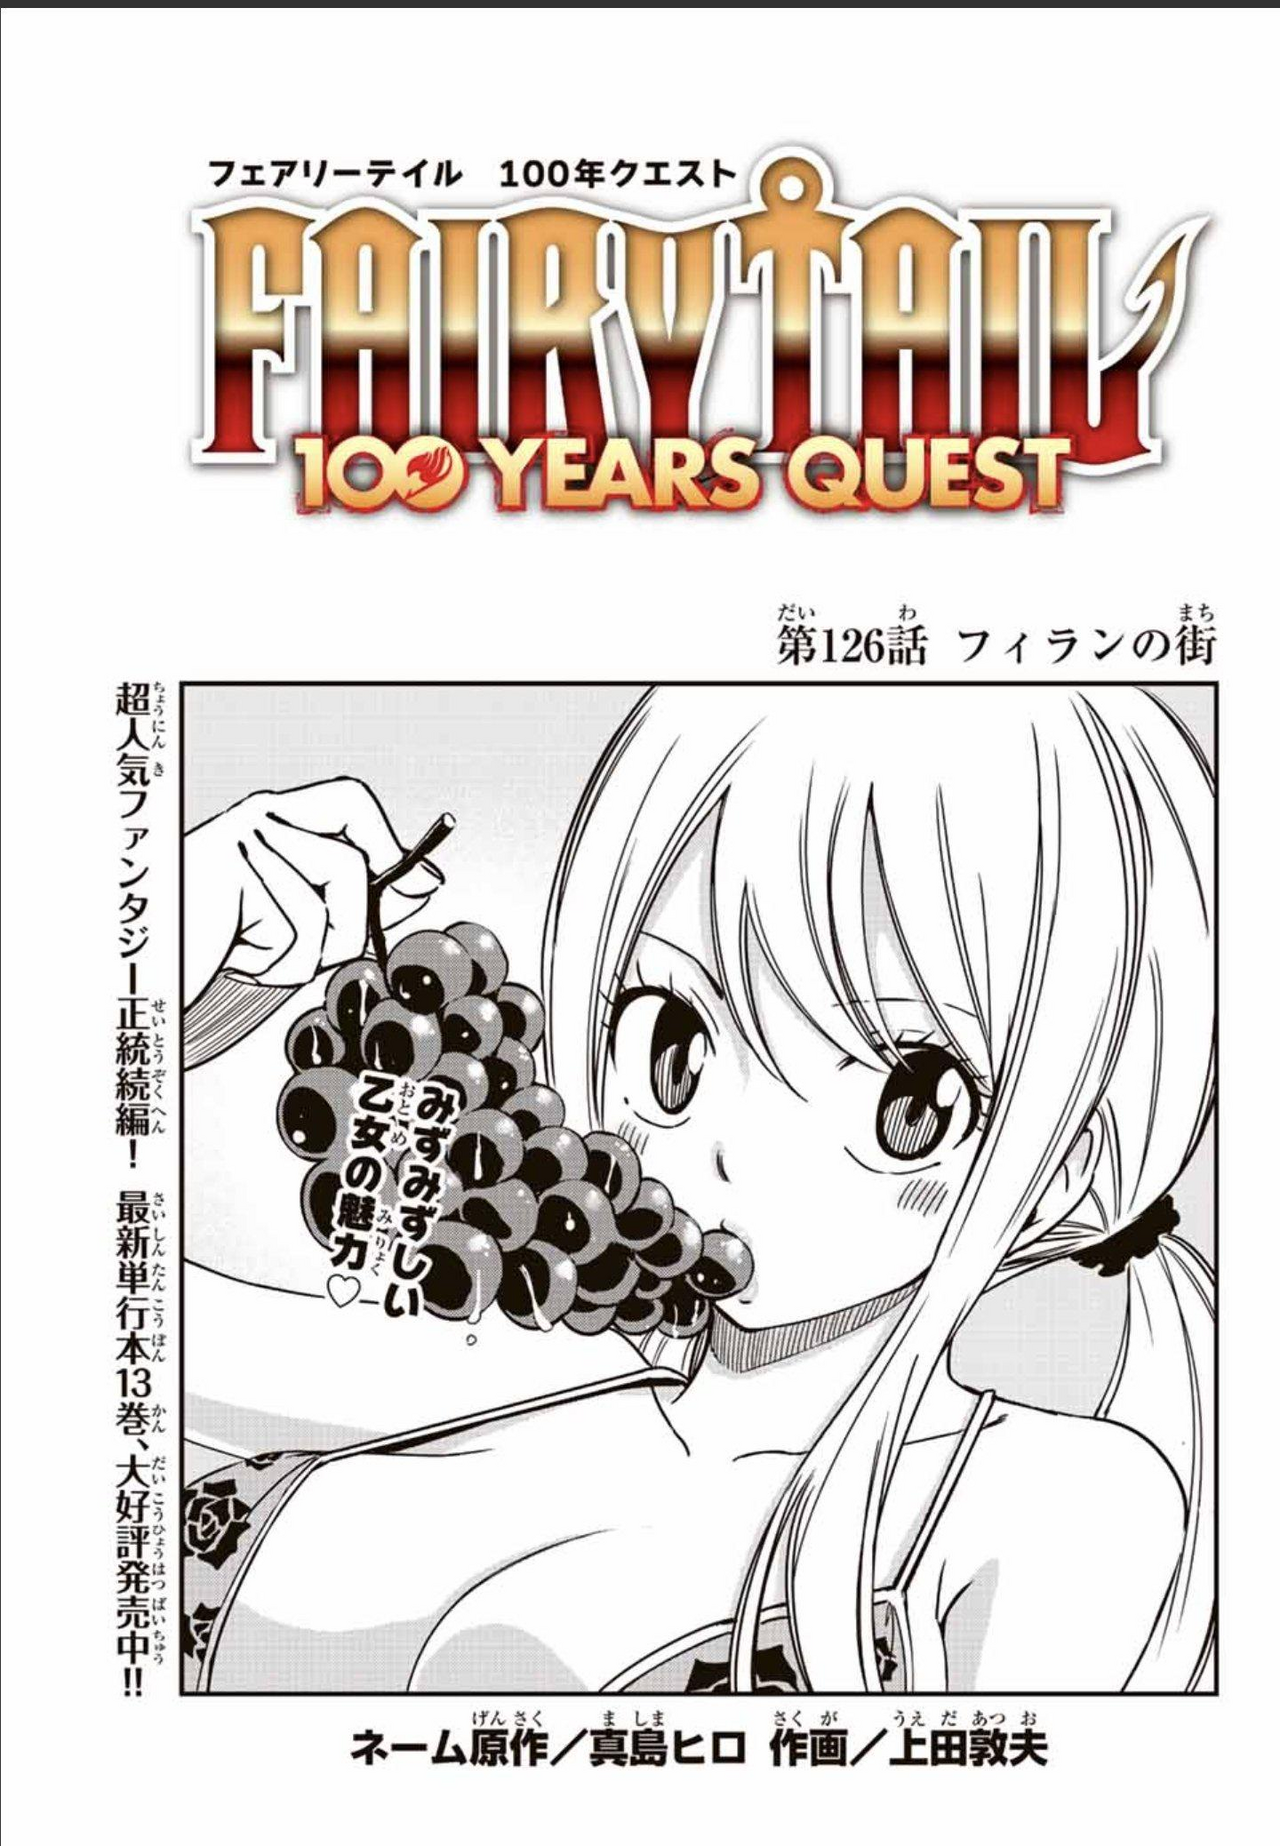 Fairy Tail: 100 Years Quest  JP Chapter 117 : r/fairytail